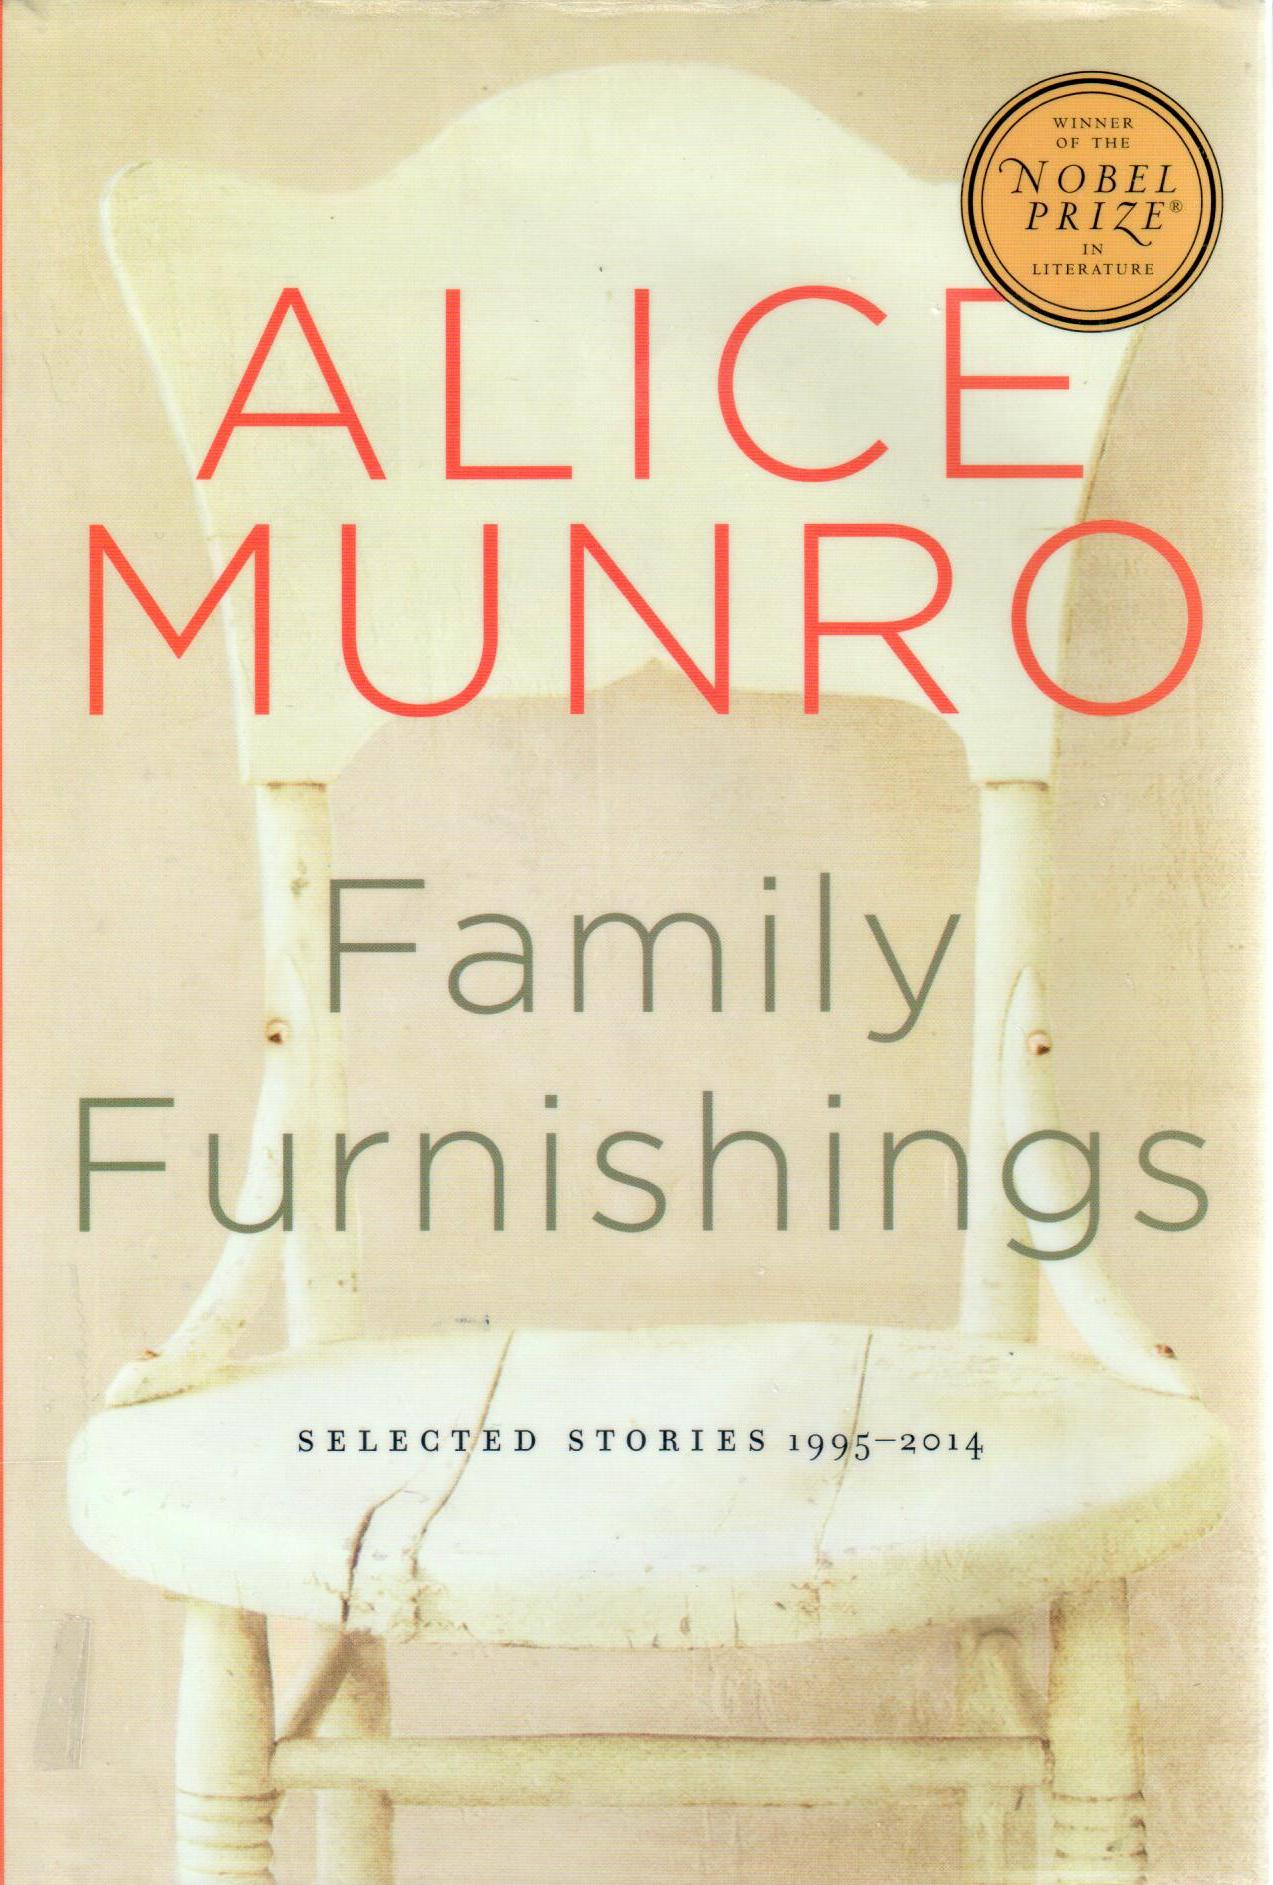 Family furnishings: selected stories 1995-2014